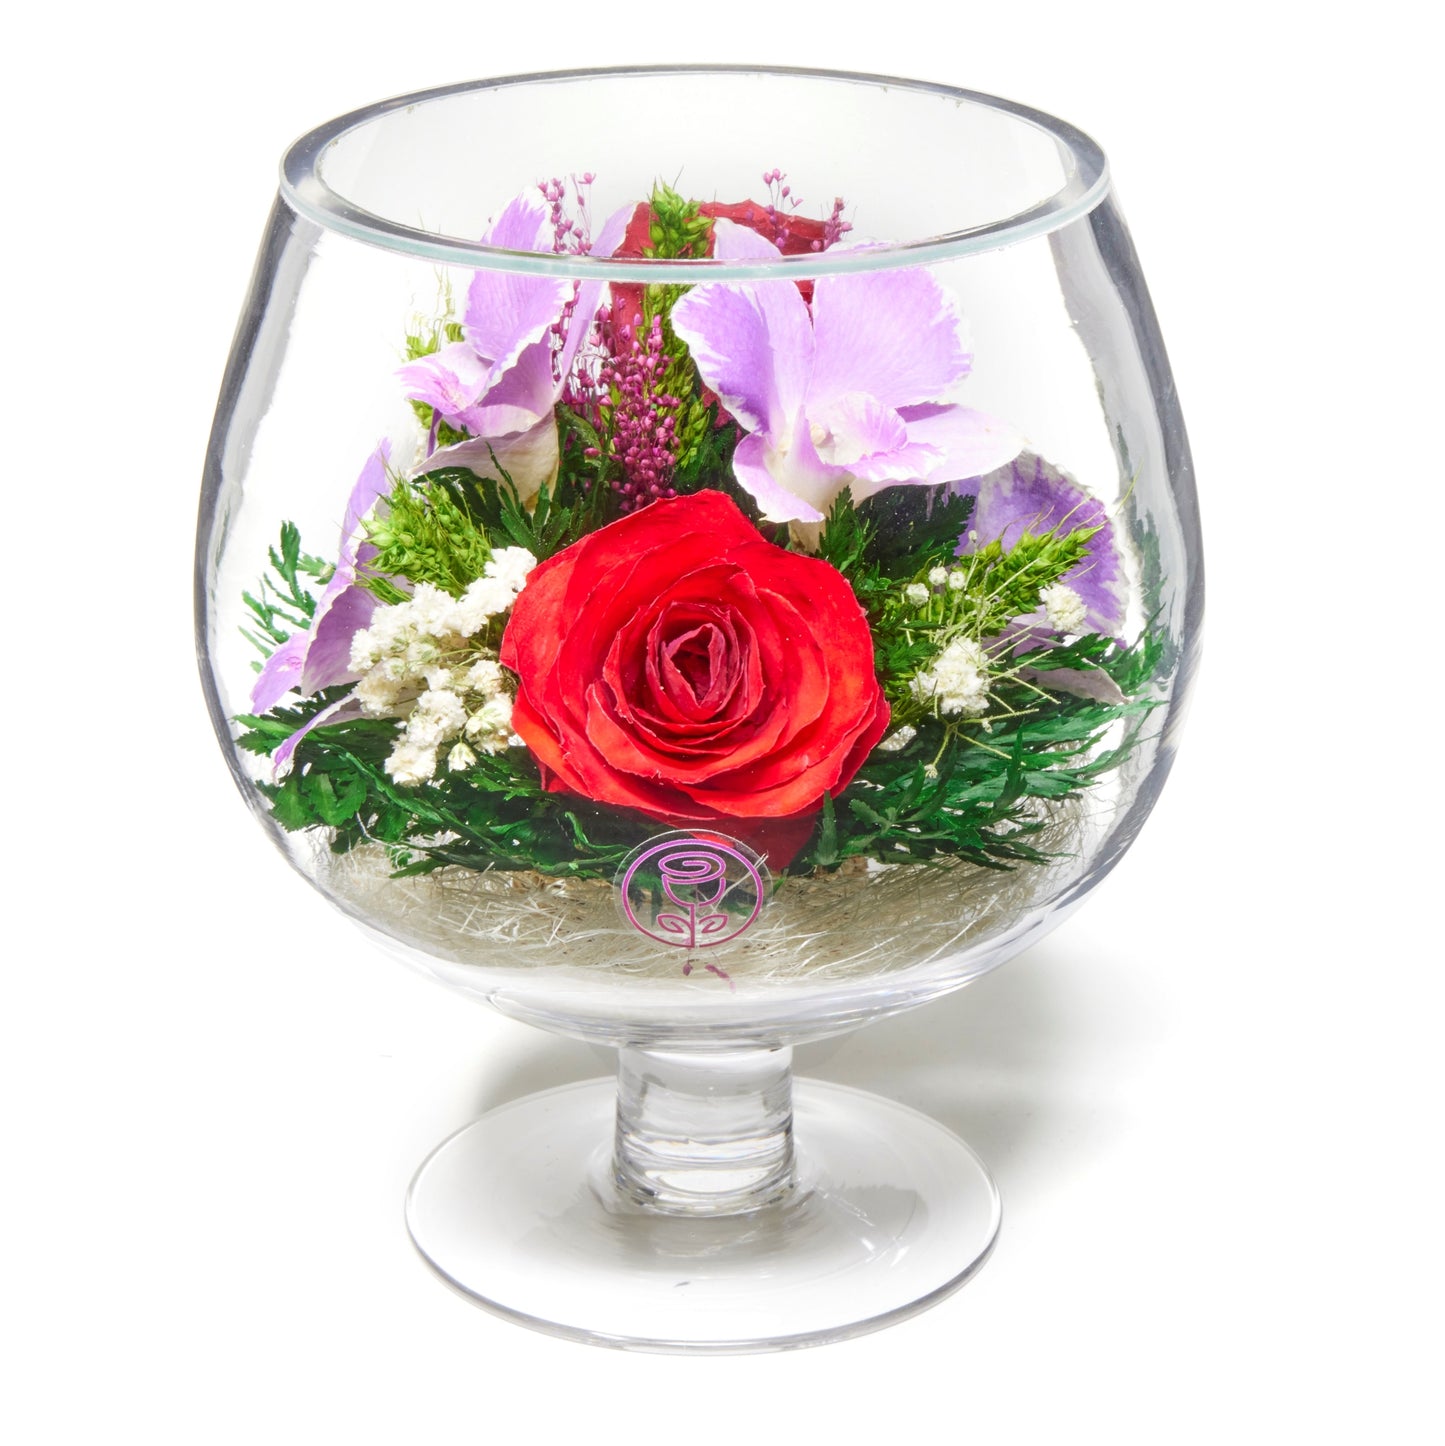 Radiant Kaleidoscope: A Burst of Vibrant Blooms in One Bouquet of Mixed Orchids and Roses